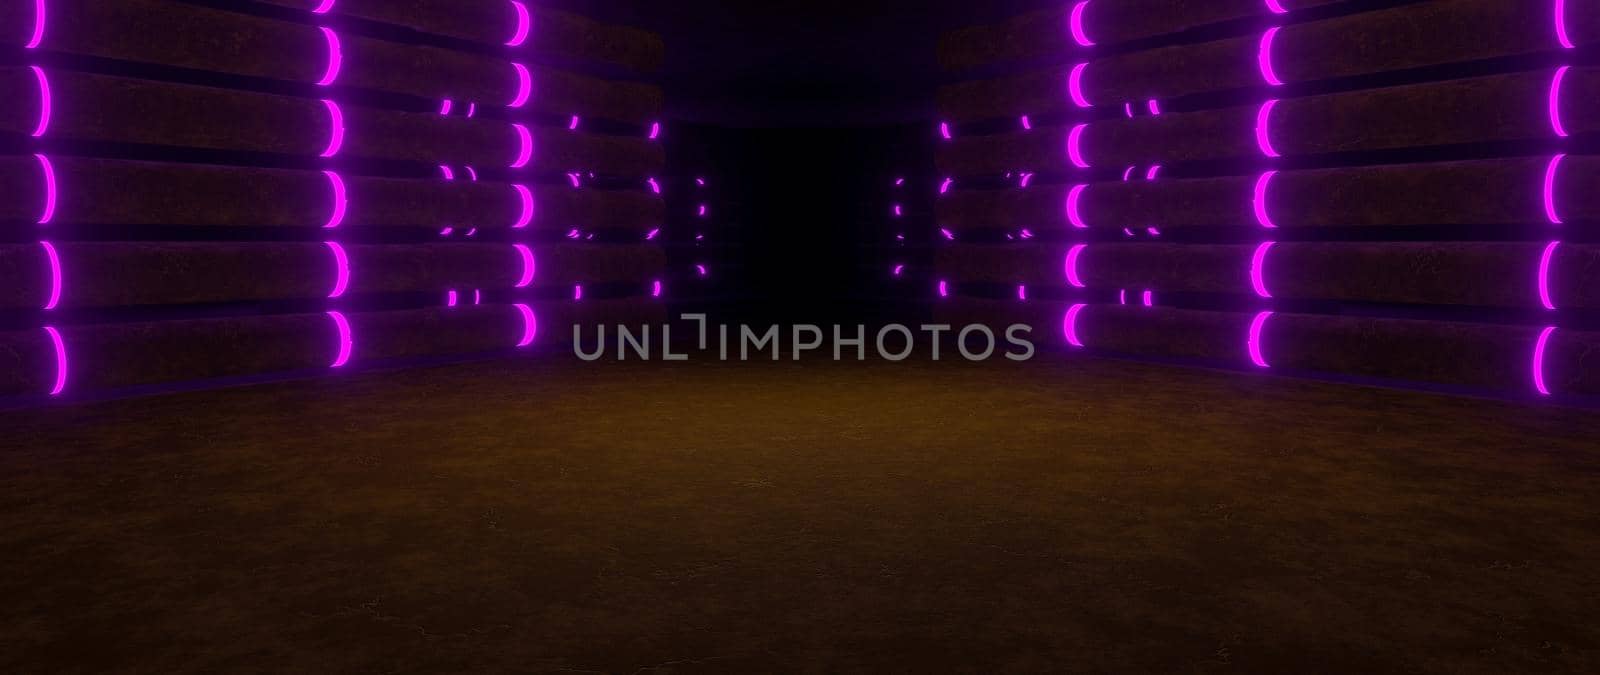 Grungy Rusty Club Empty Hall Bright Purple Banner Background Wallpaper For Presentations 3D Rendering